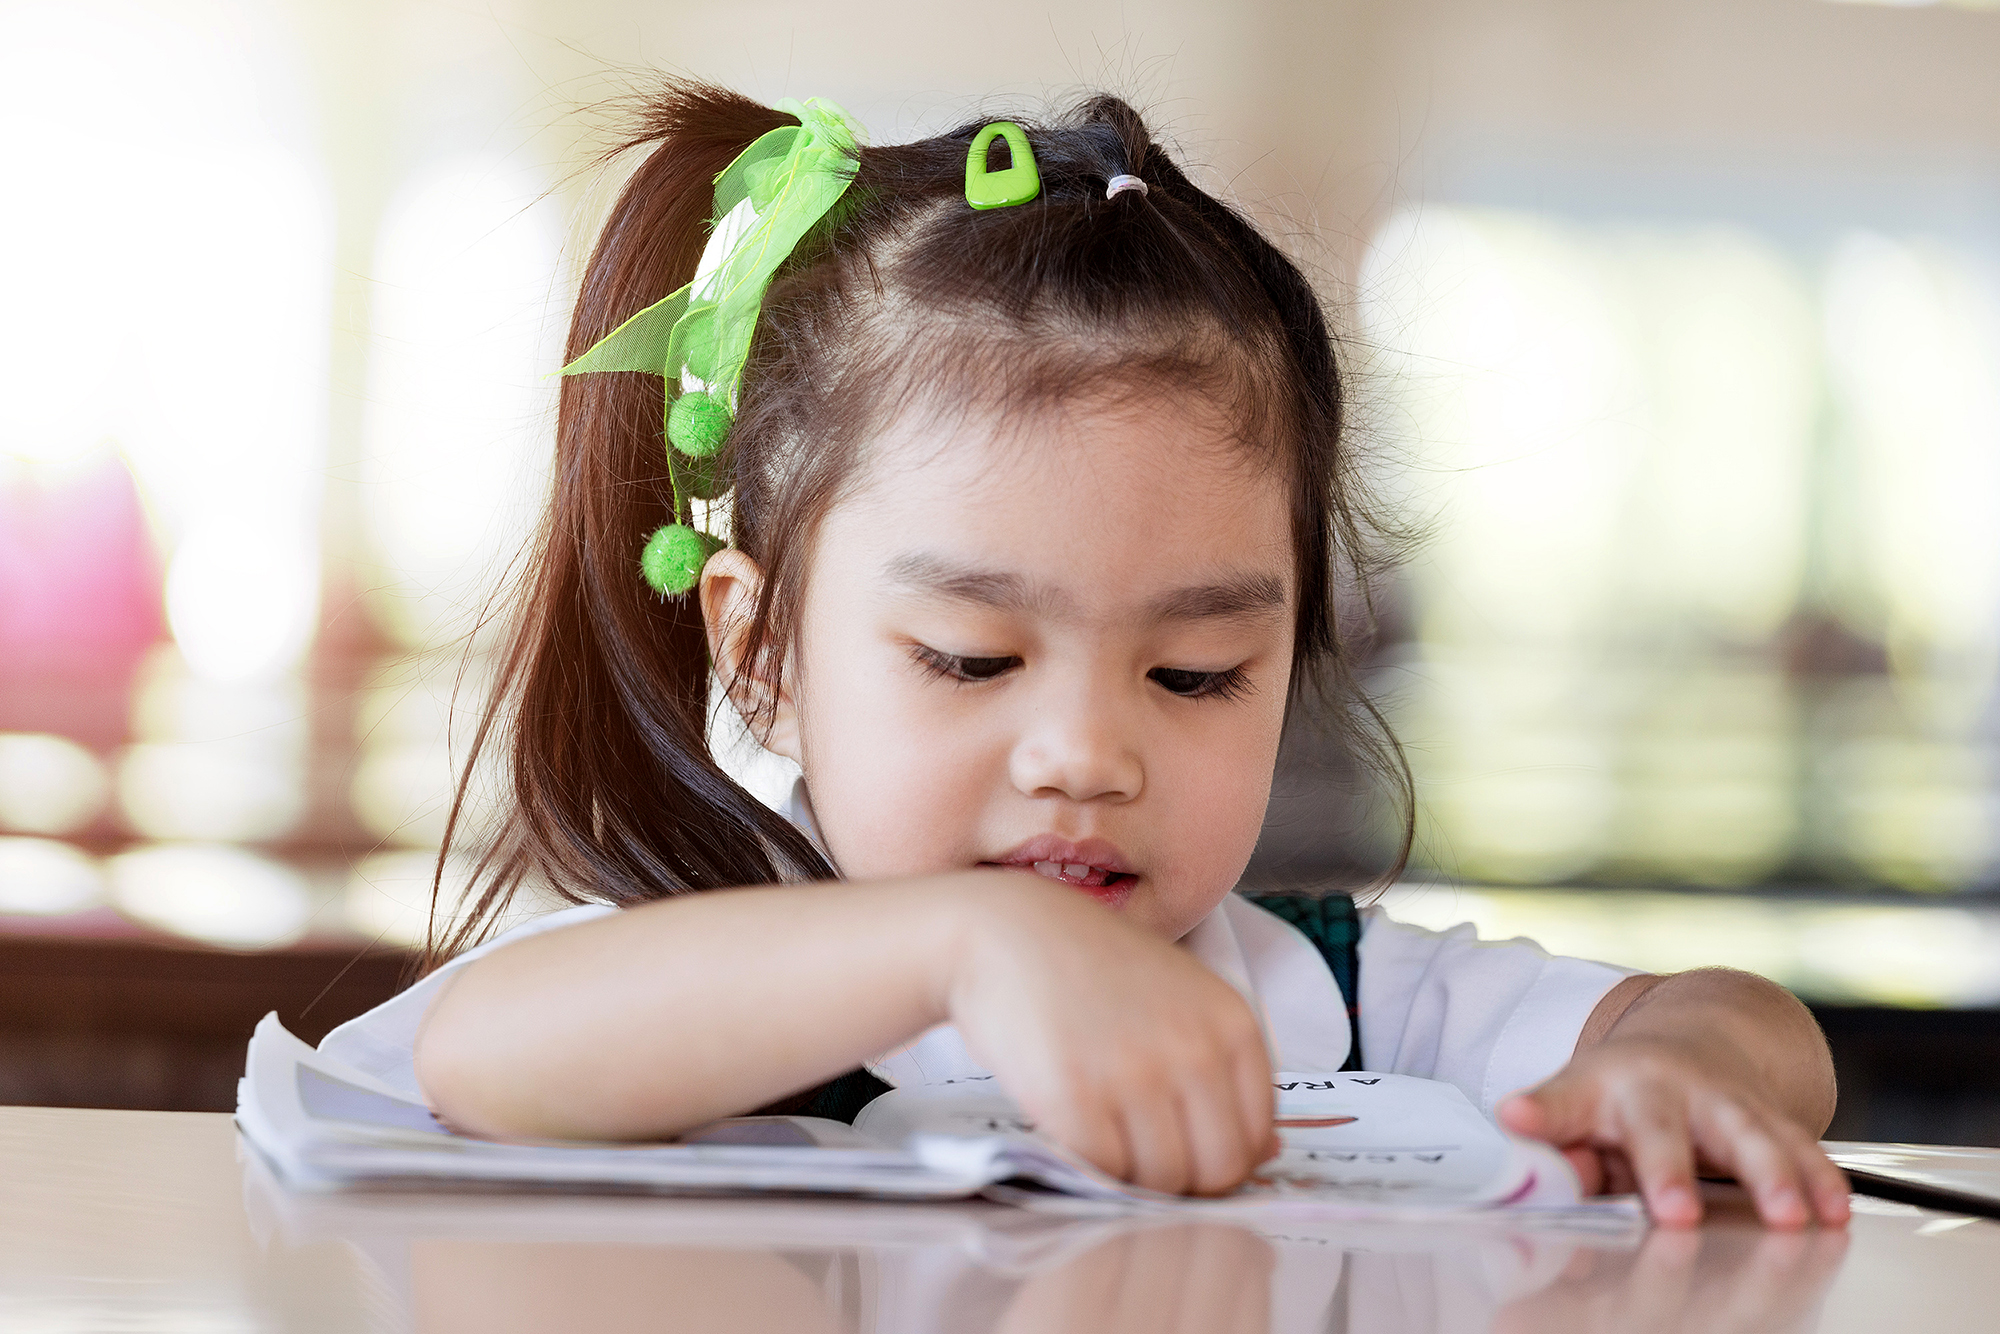 Young Asian child with green bows in her hair sits at a table reading.